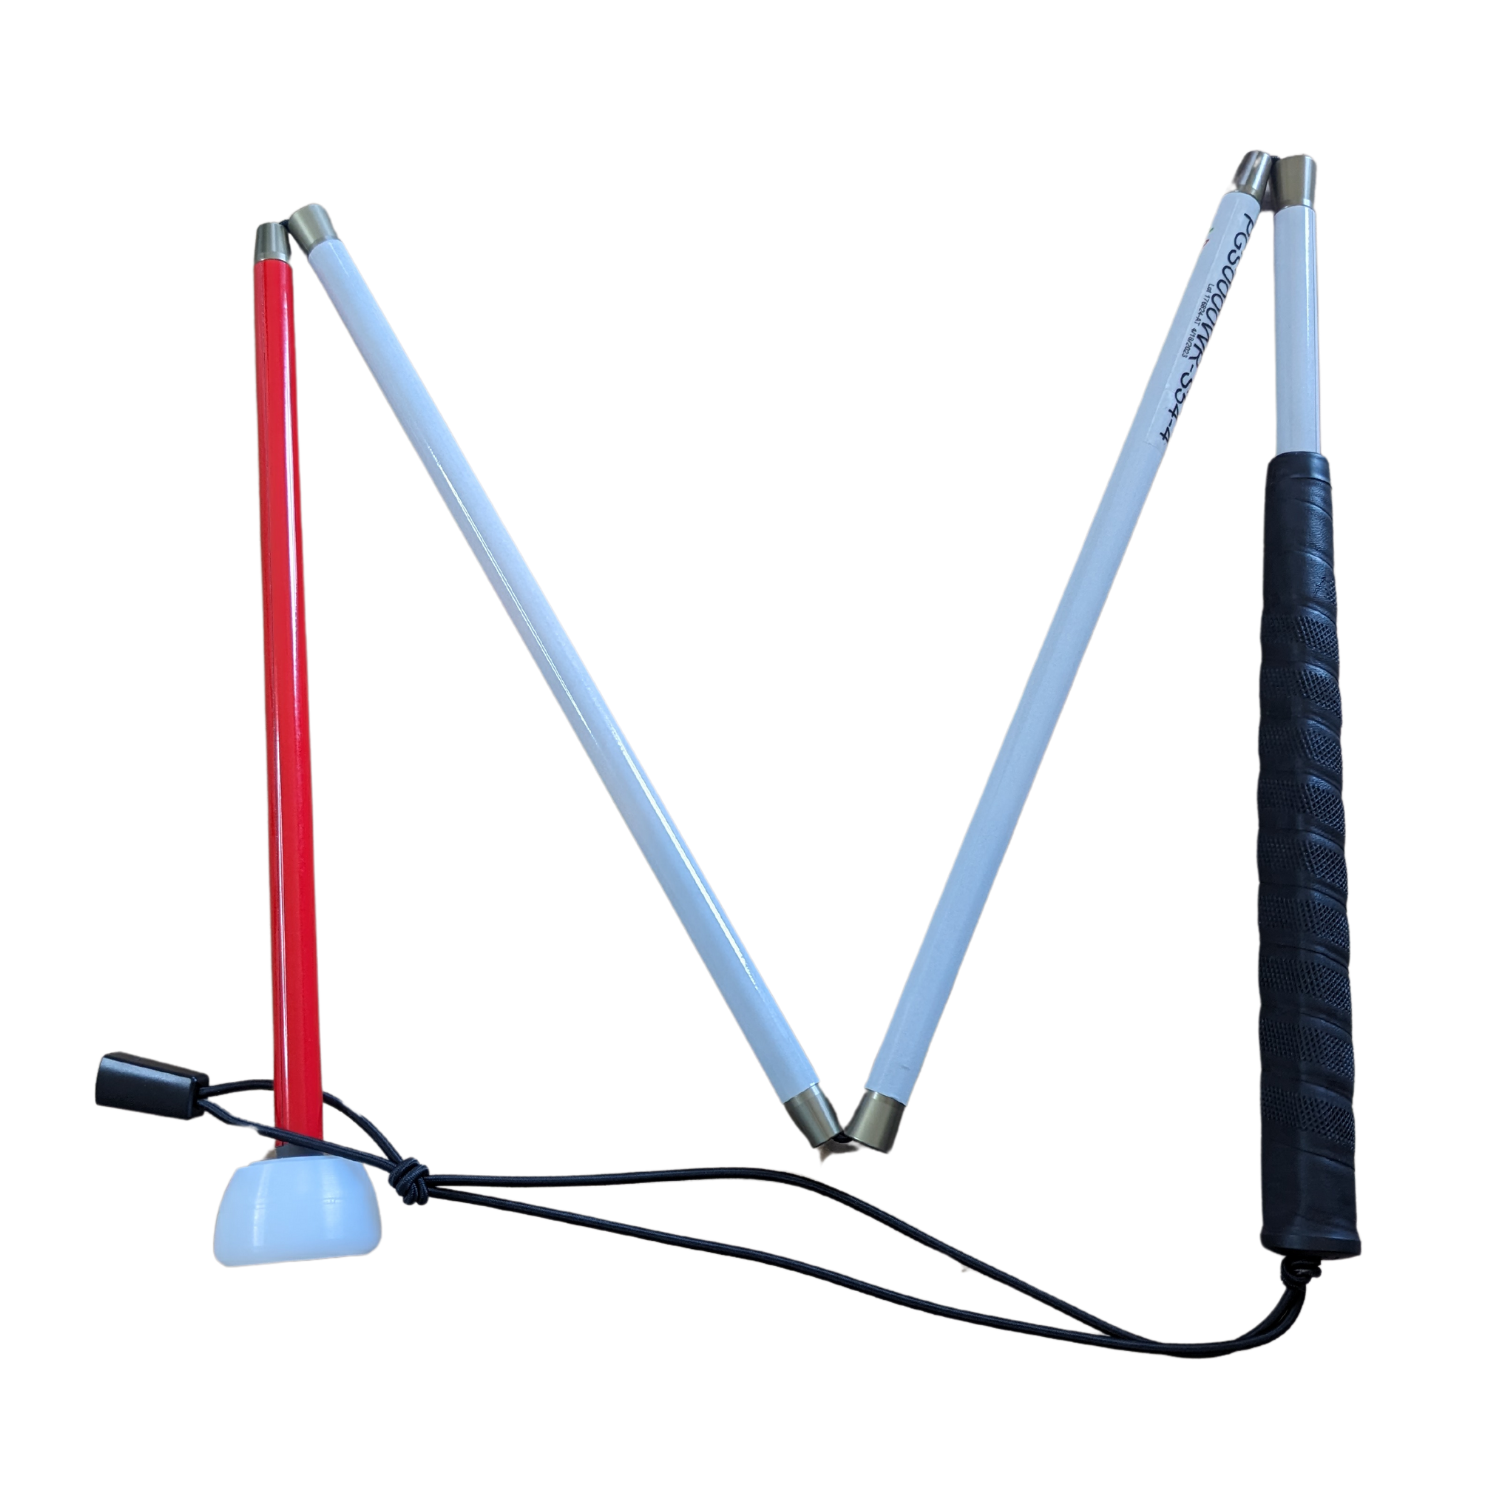 Image of Ambutech Graphite Mobility Cane with white flex tip.